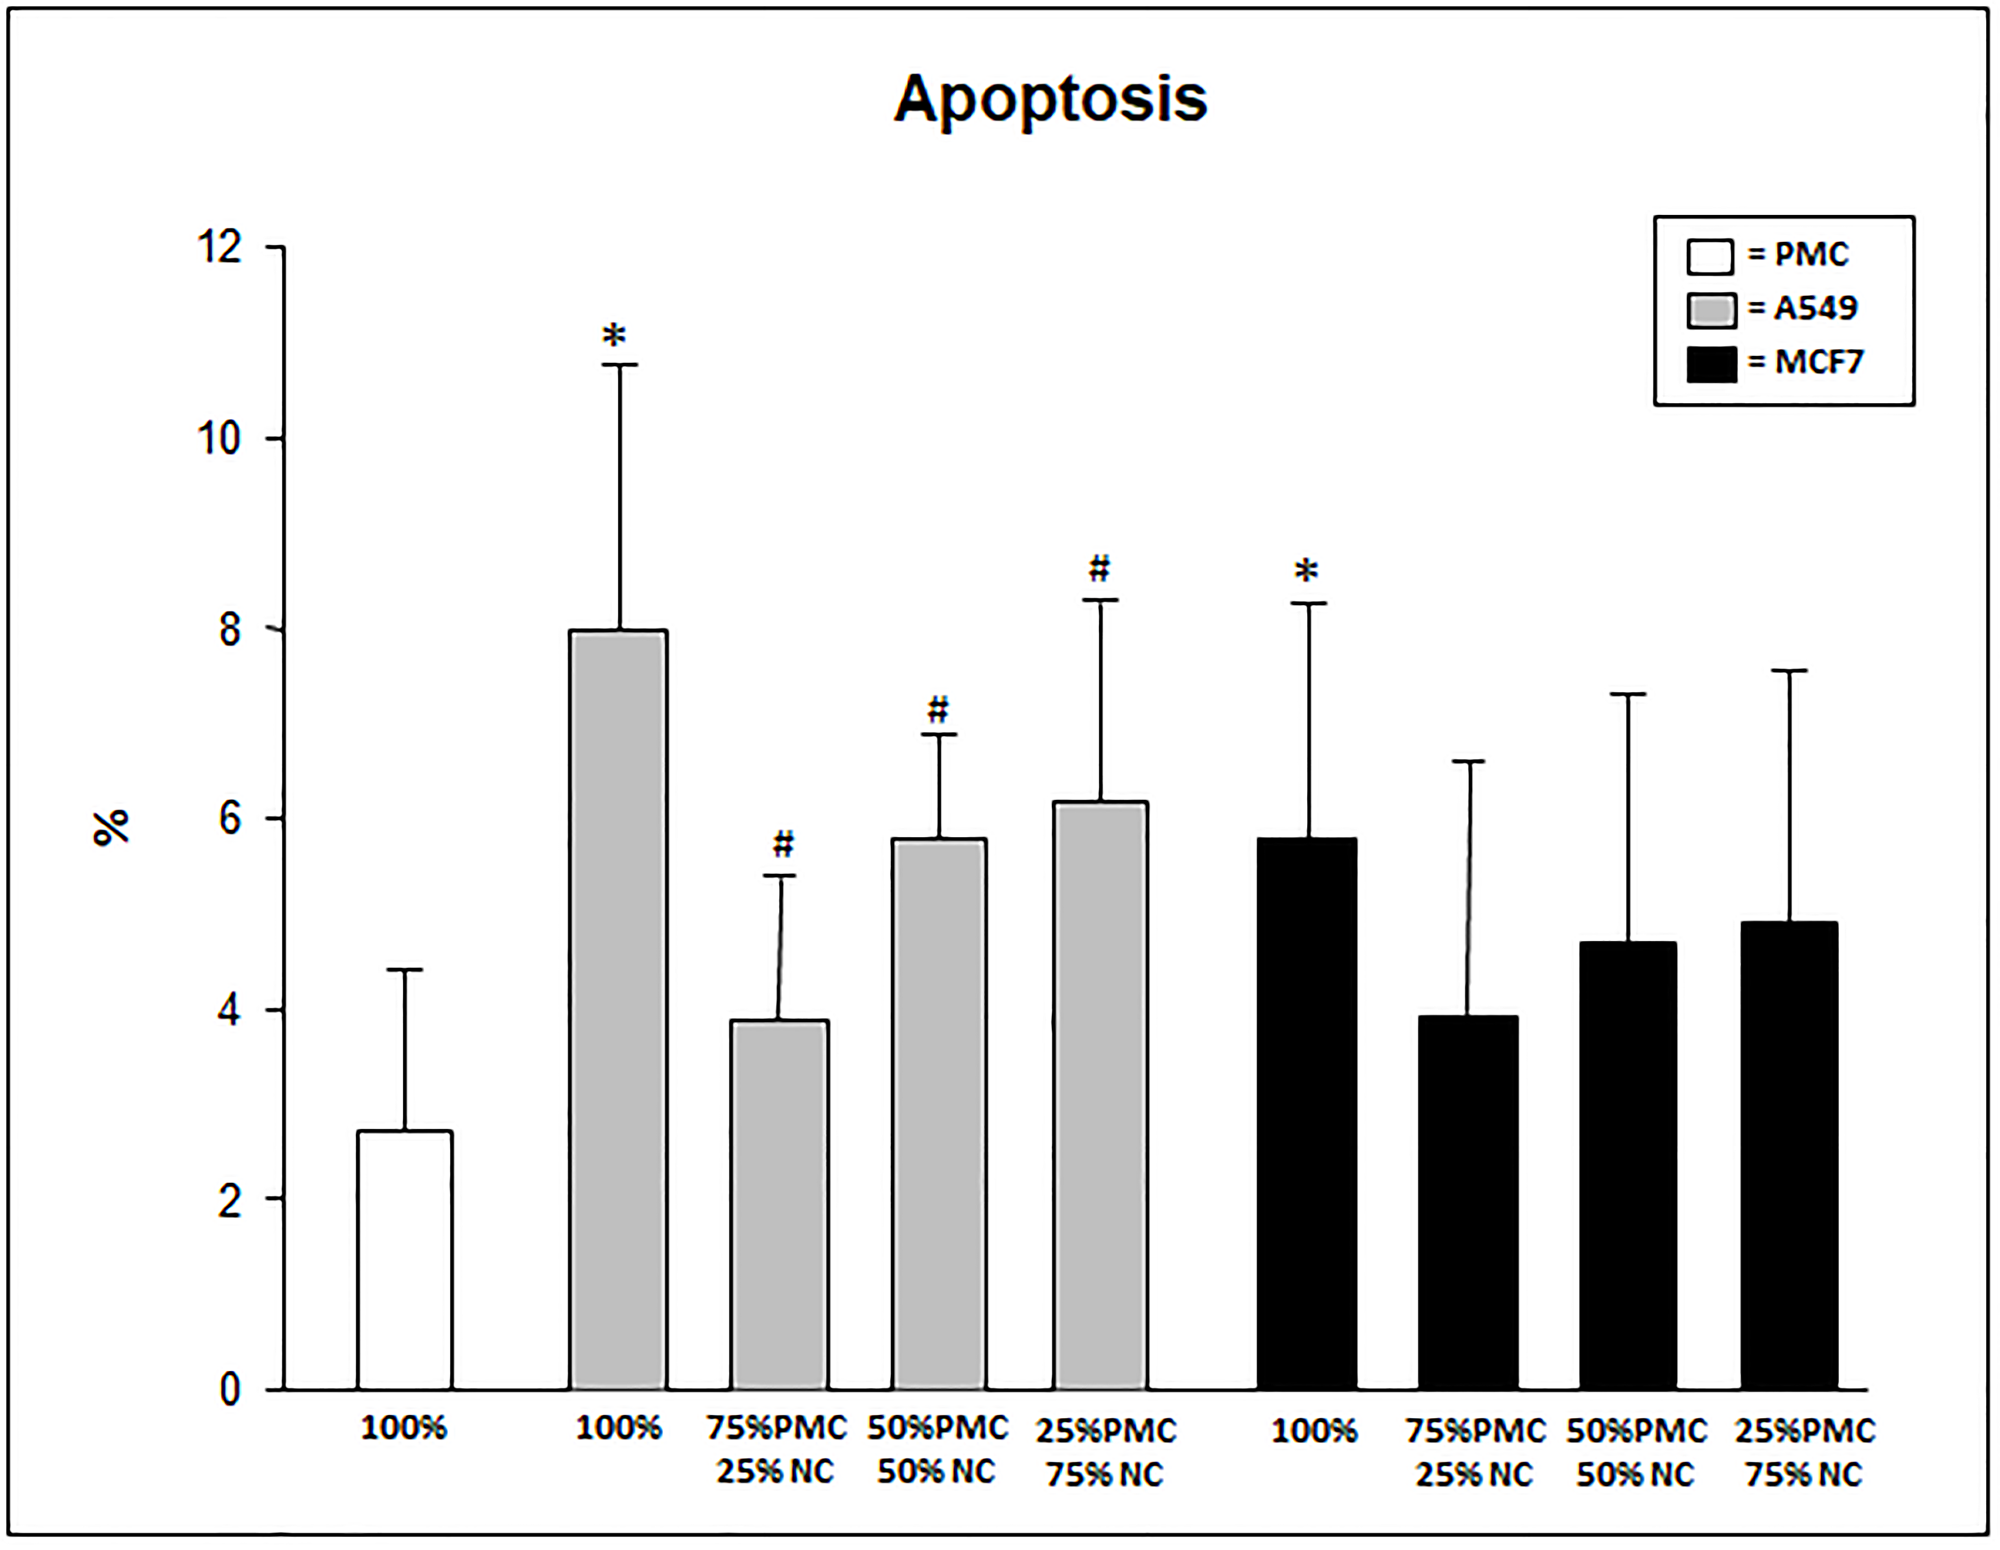 Percentage of apoptosis in PMC, A549 and/or MCF7 after 24 hours exposed to talc.